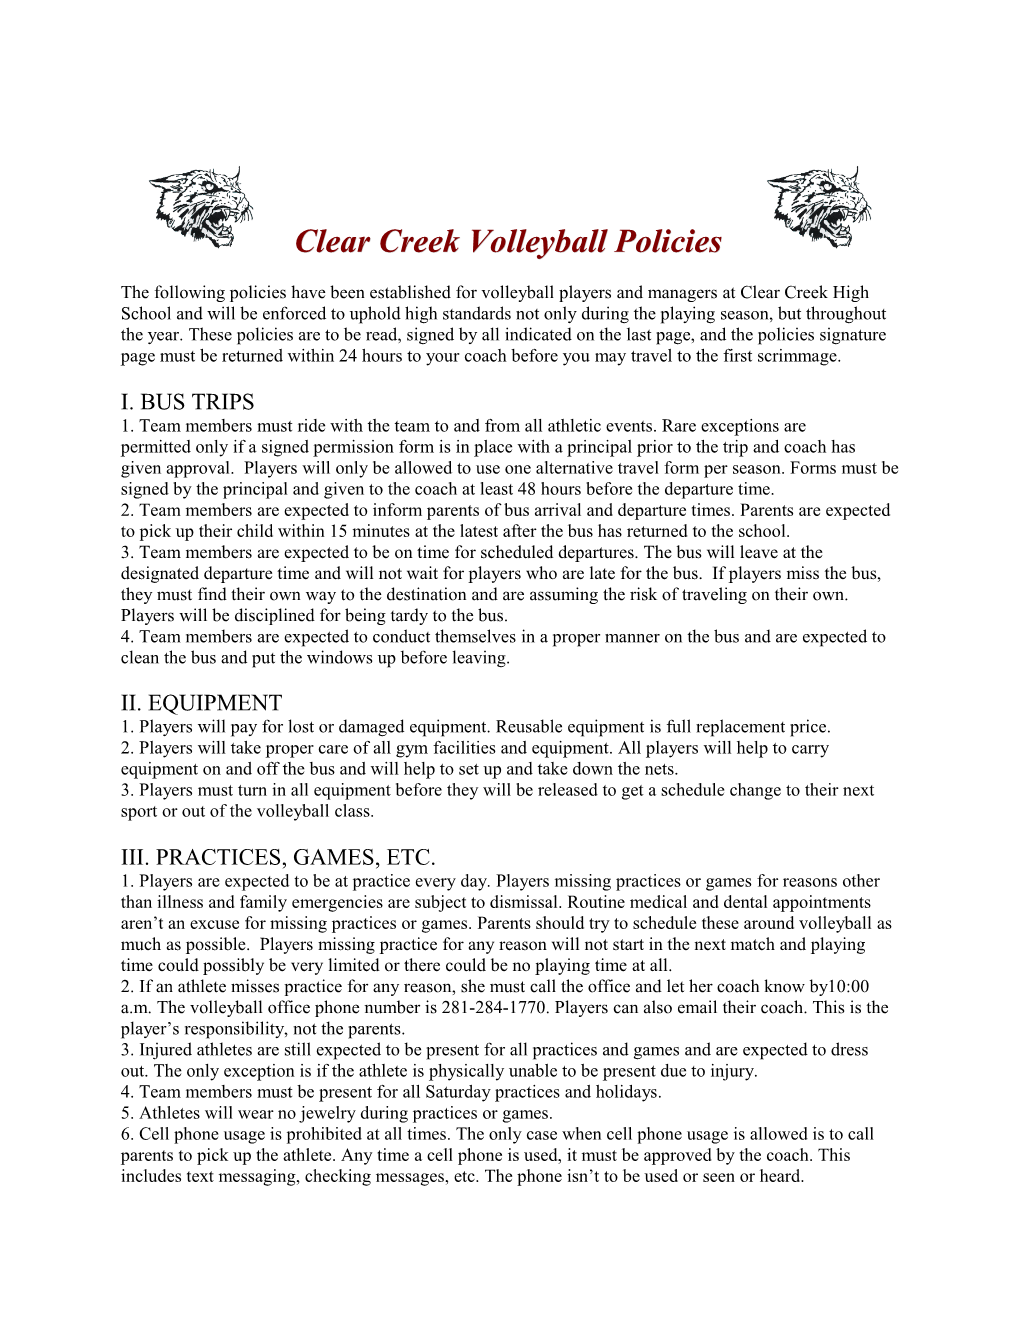 Clear Creek Volleyball Policies